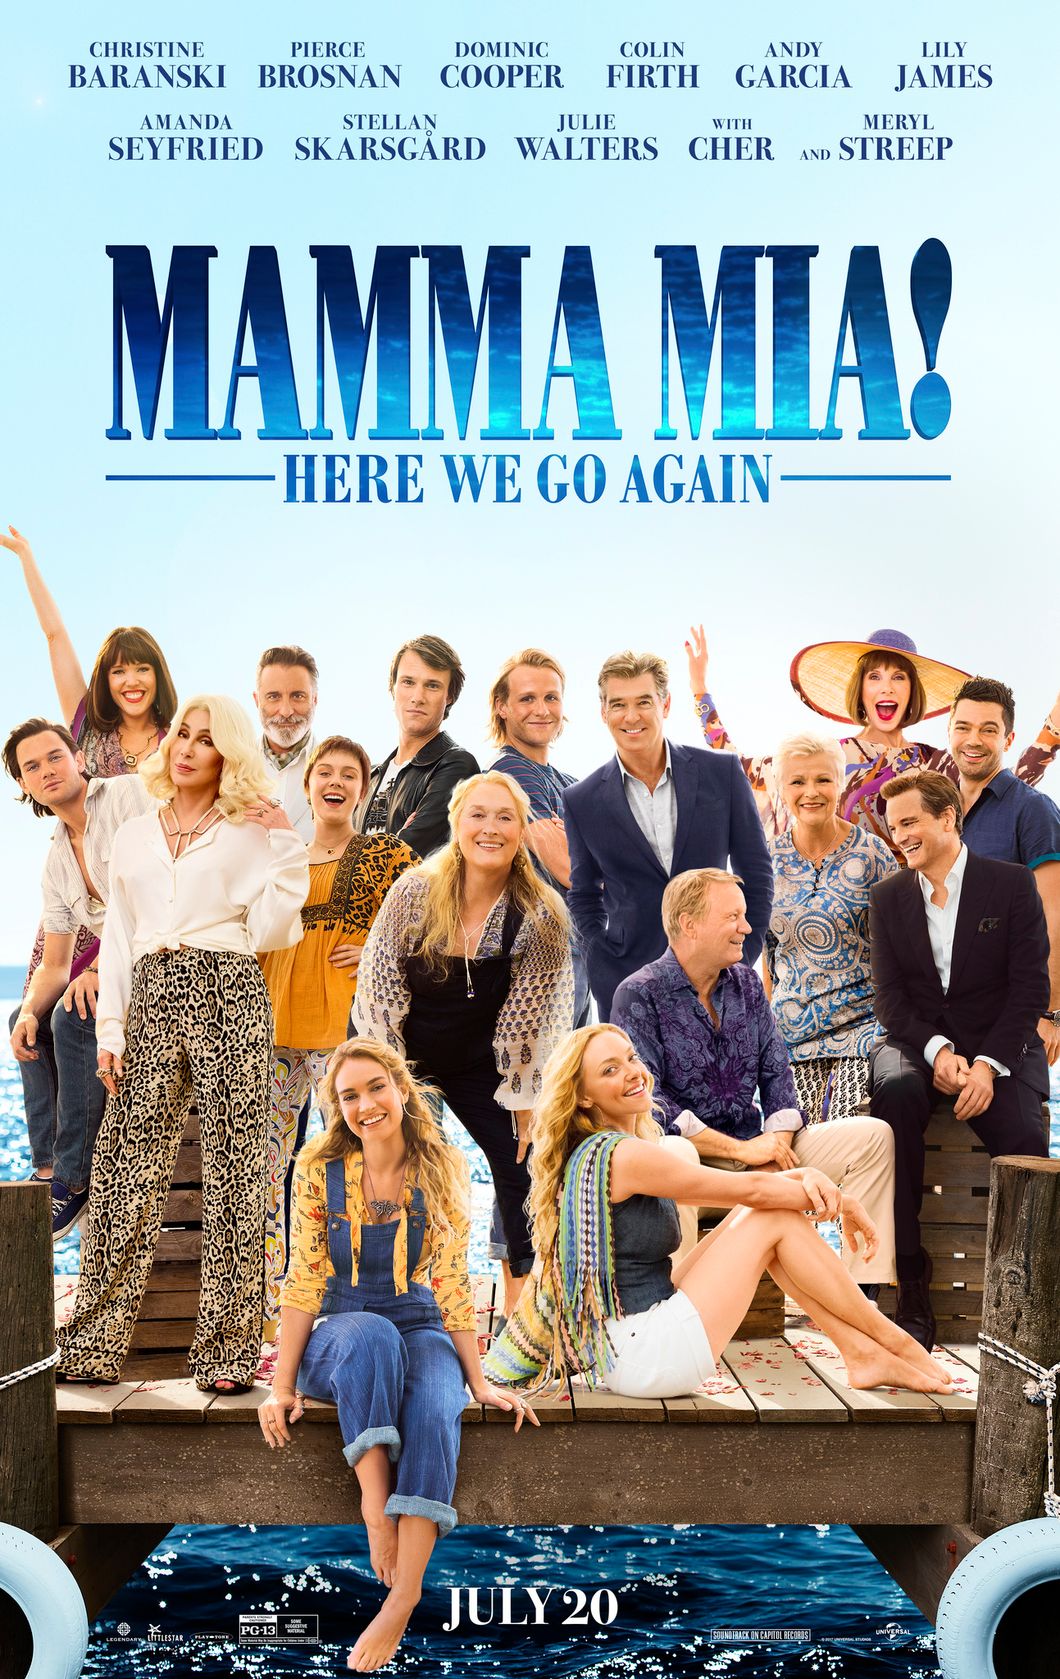 7 Reasons Why Mamma Mia Is The Ultimate Go-To Movie